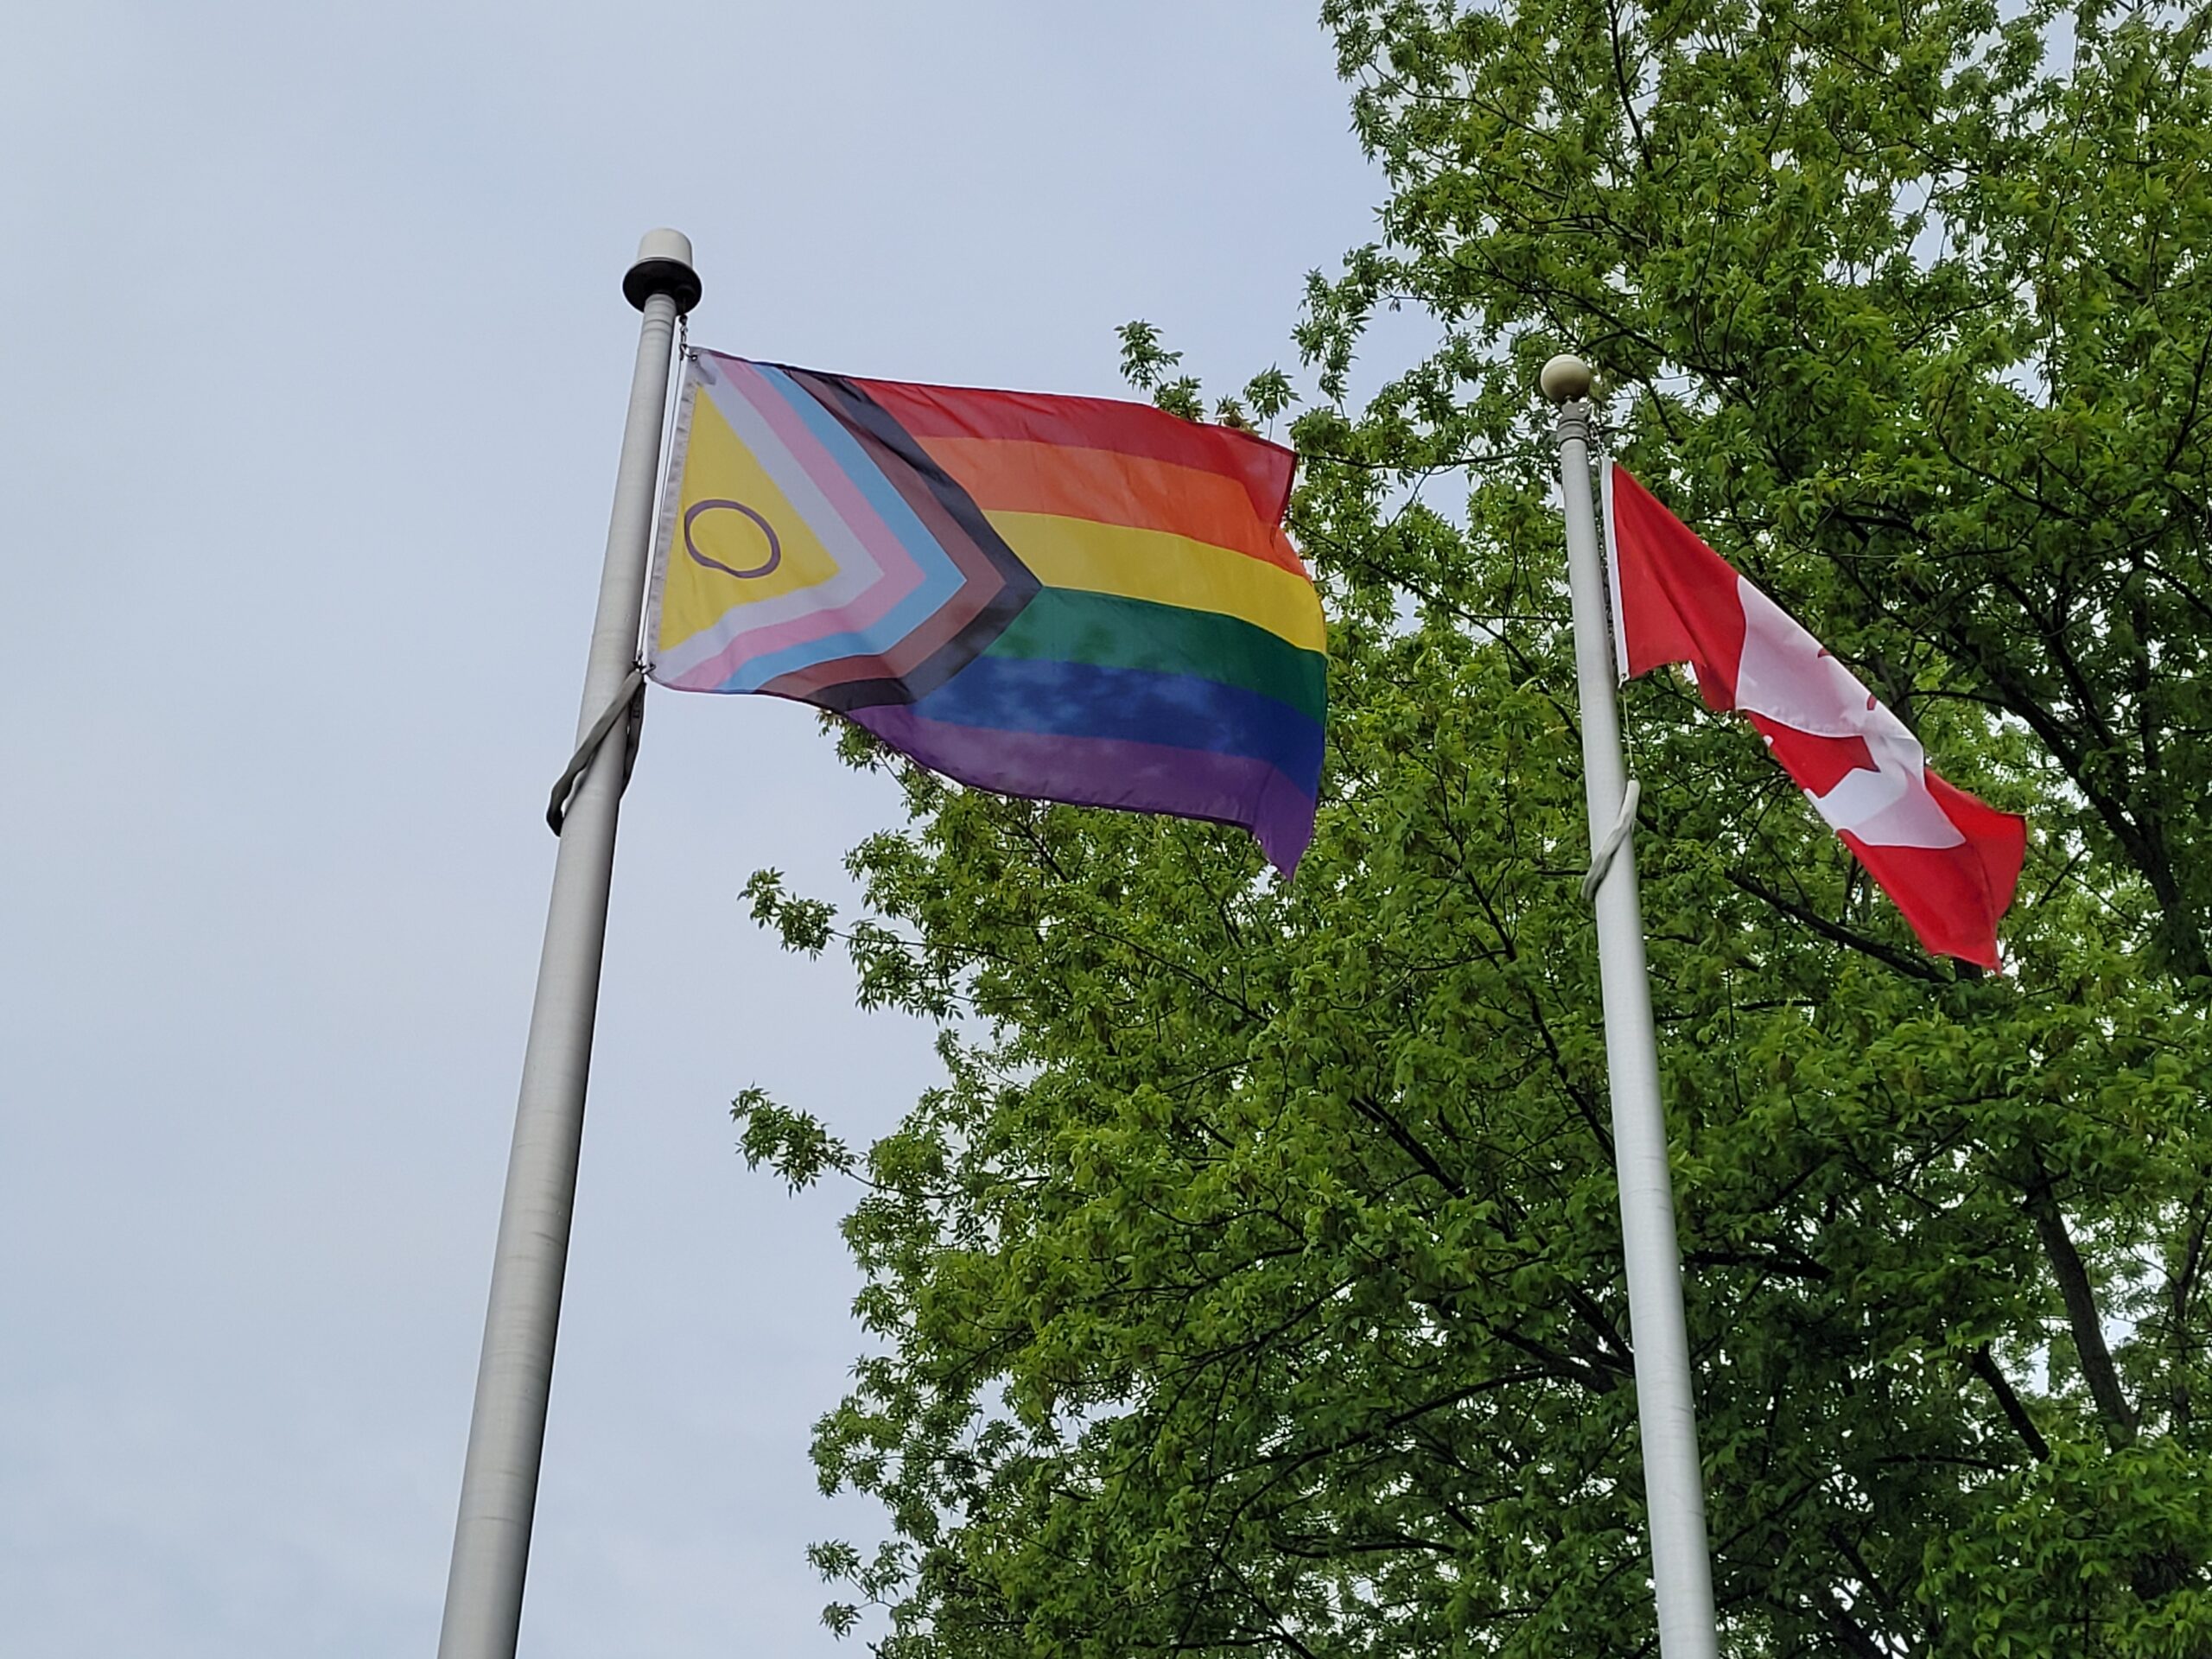 Canadian columnist calls for a "day of reckoning" for schools who don't fly the LGBT flag